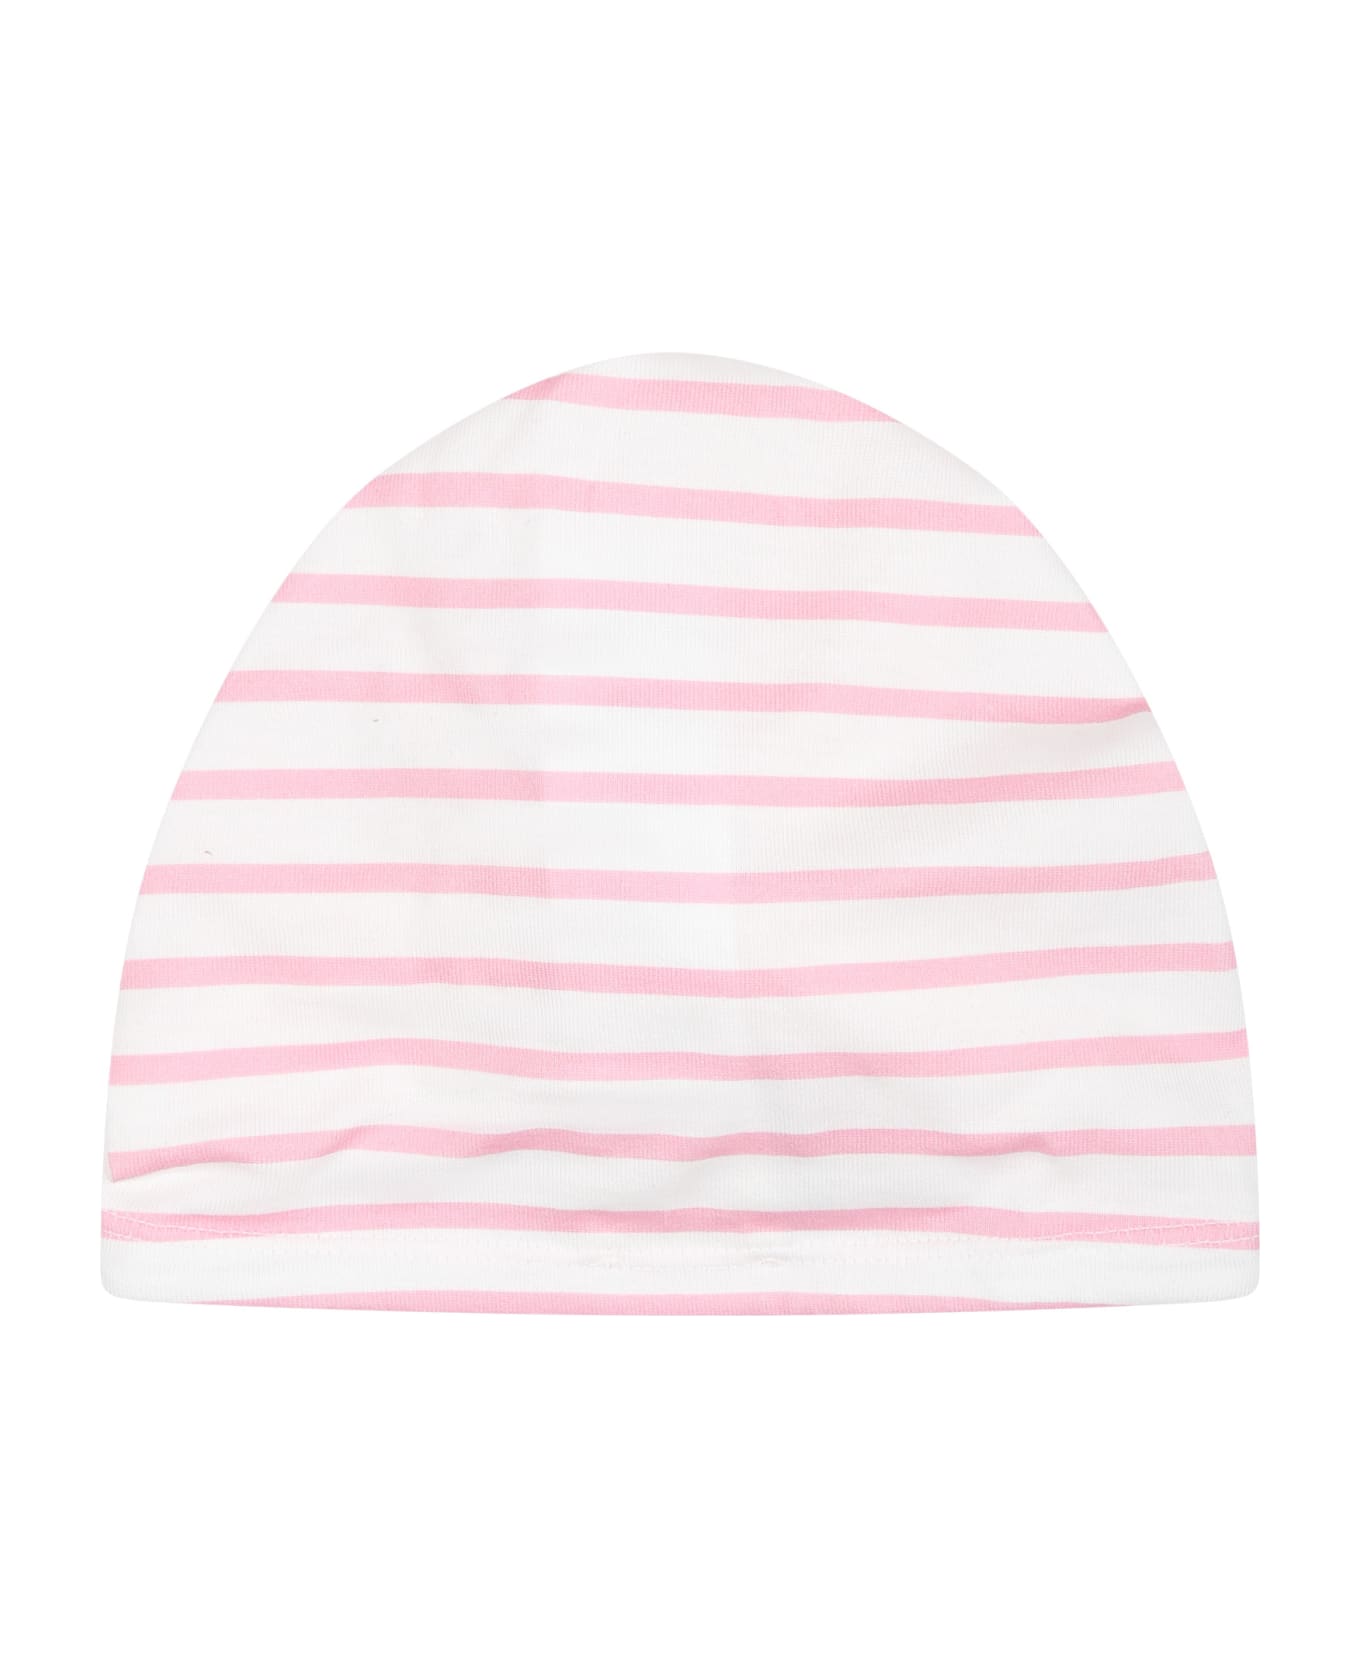 Givenchy Pink Dress For Baby Girl With Stripes - Rosa